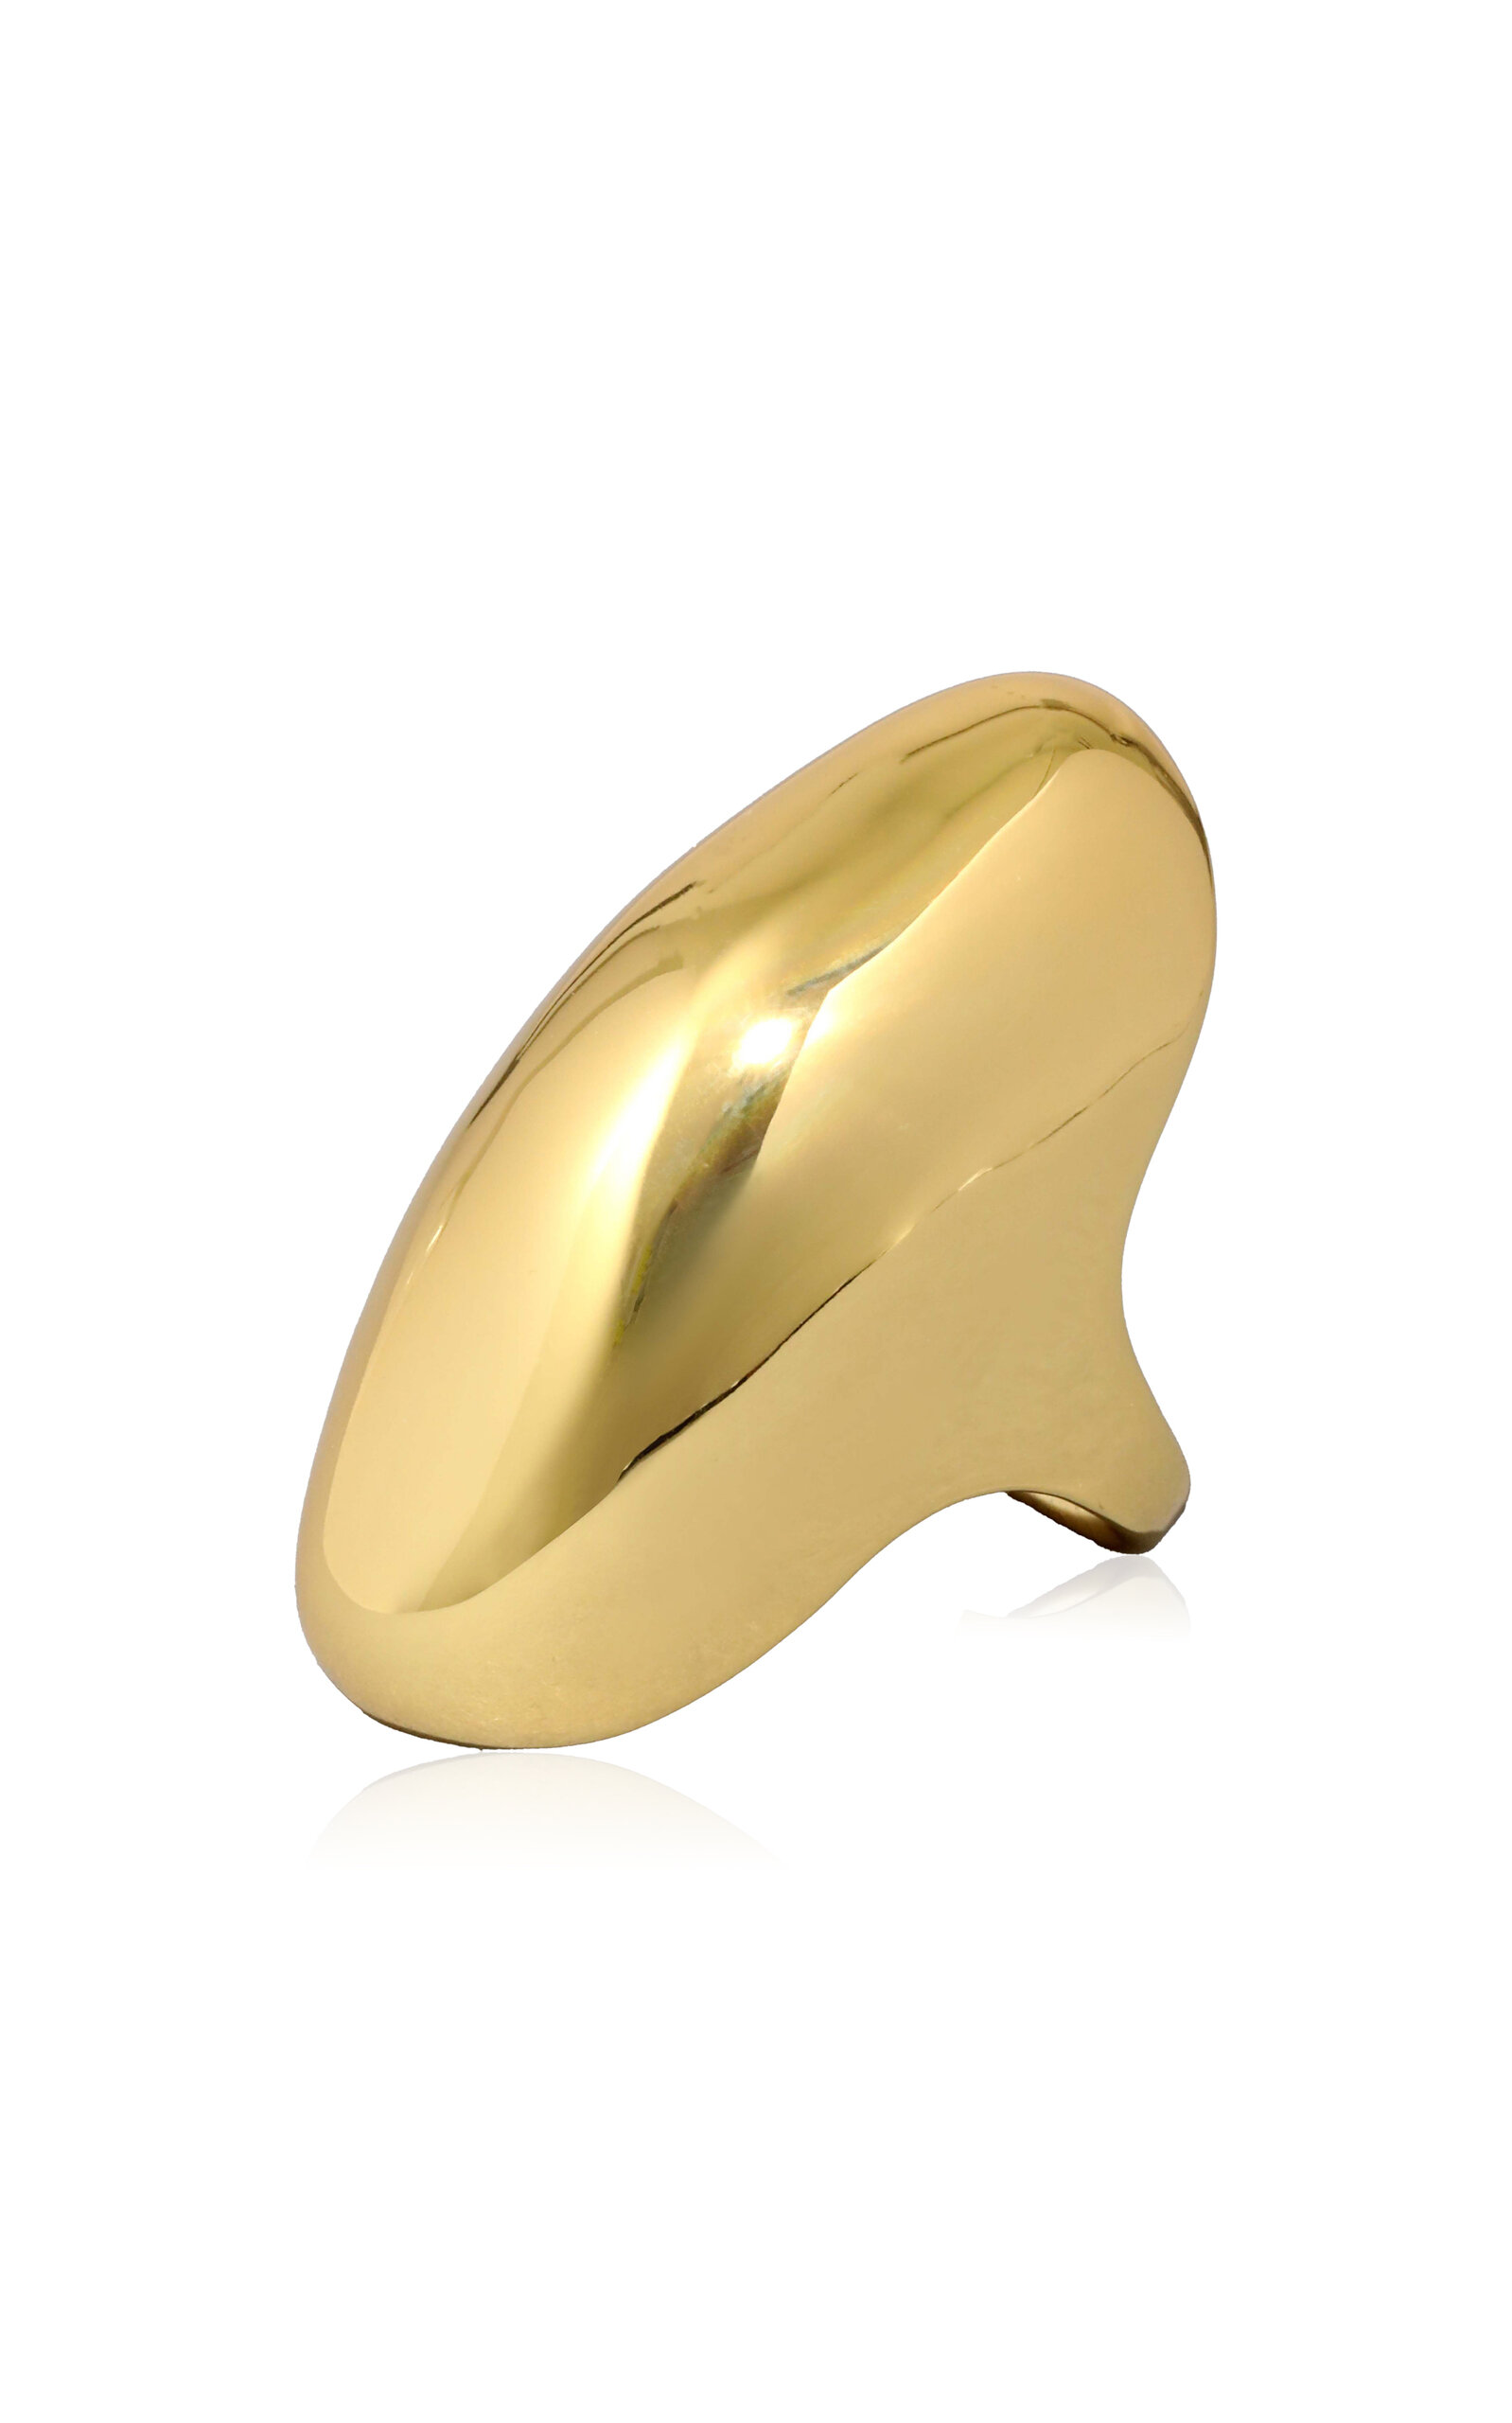 Molten 14K Gold-Plated Knuckle Ring